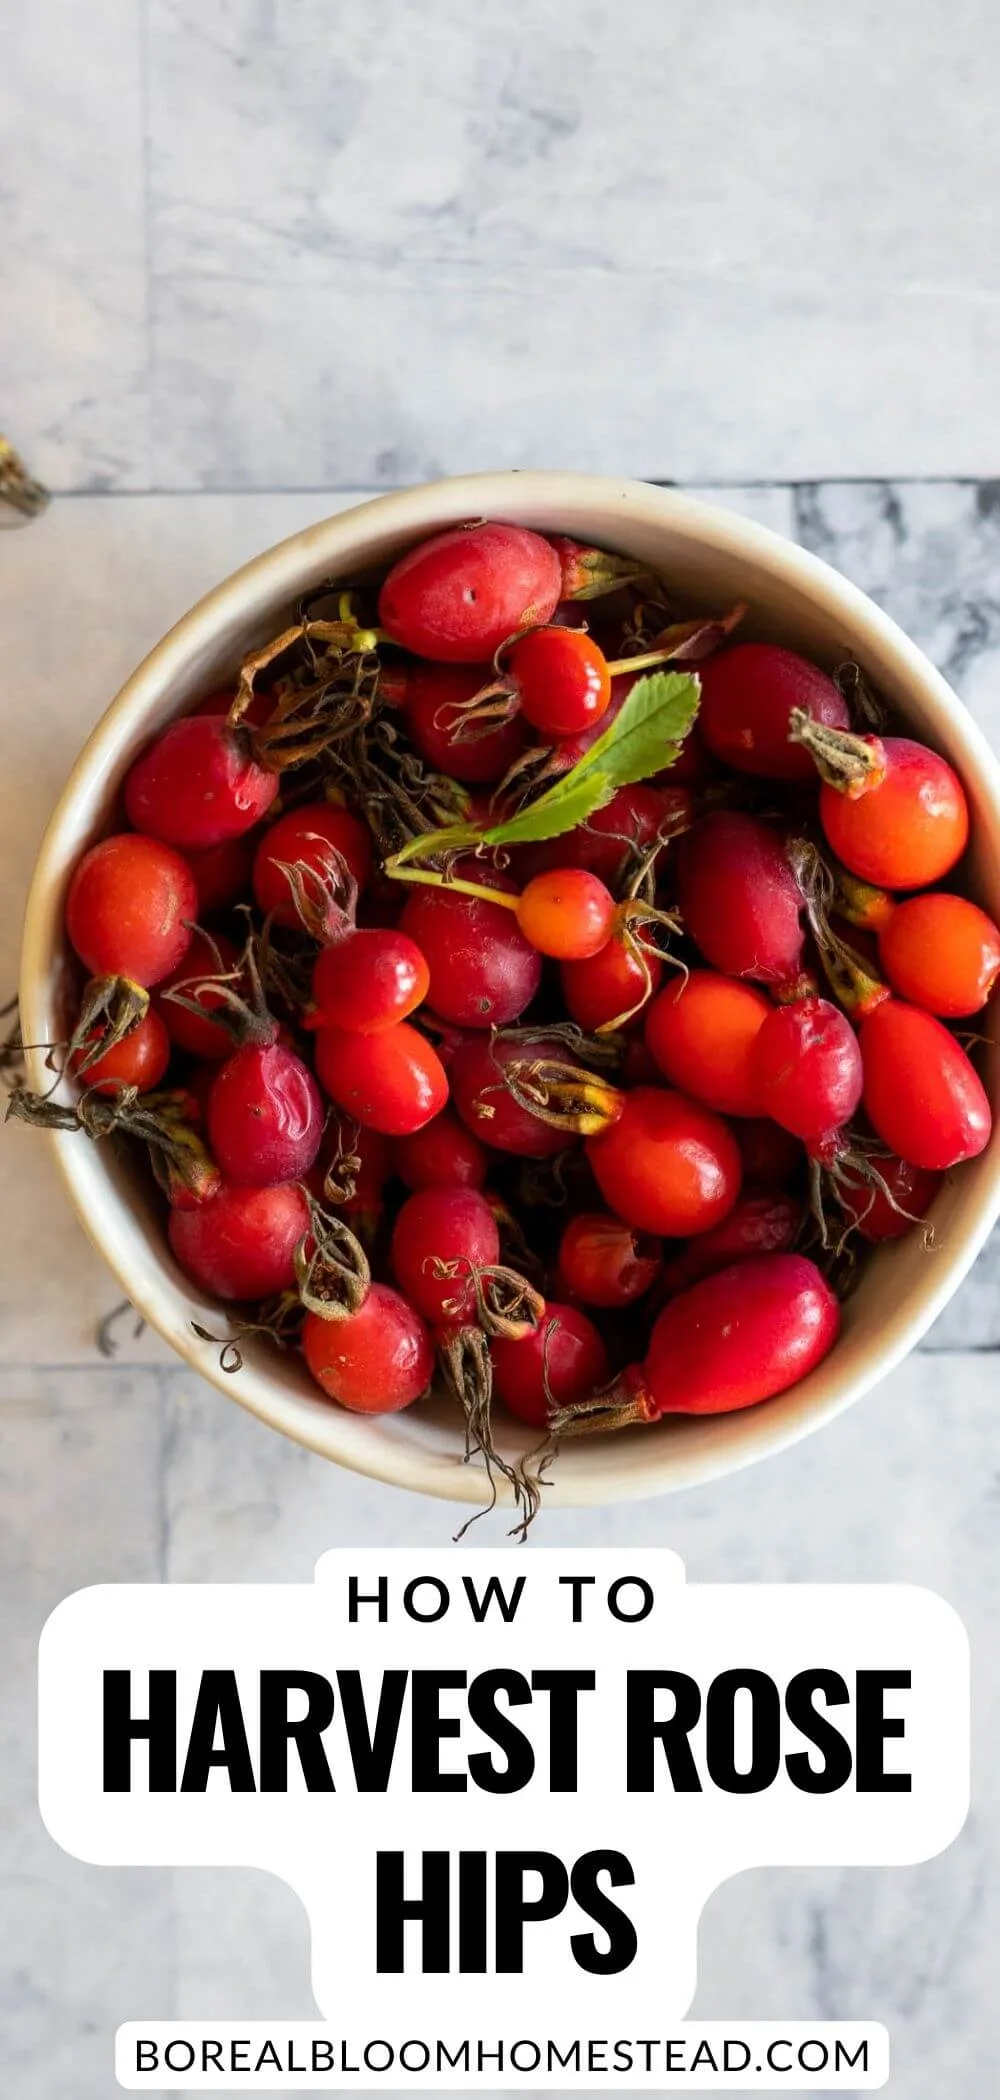 How to harvest rose hips pinterest graphic.